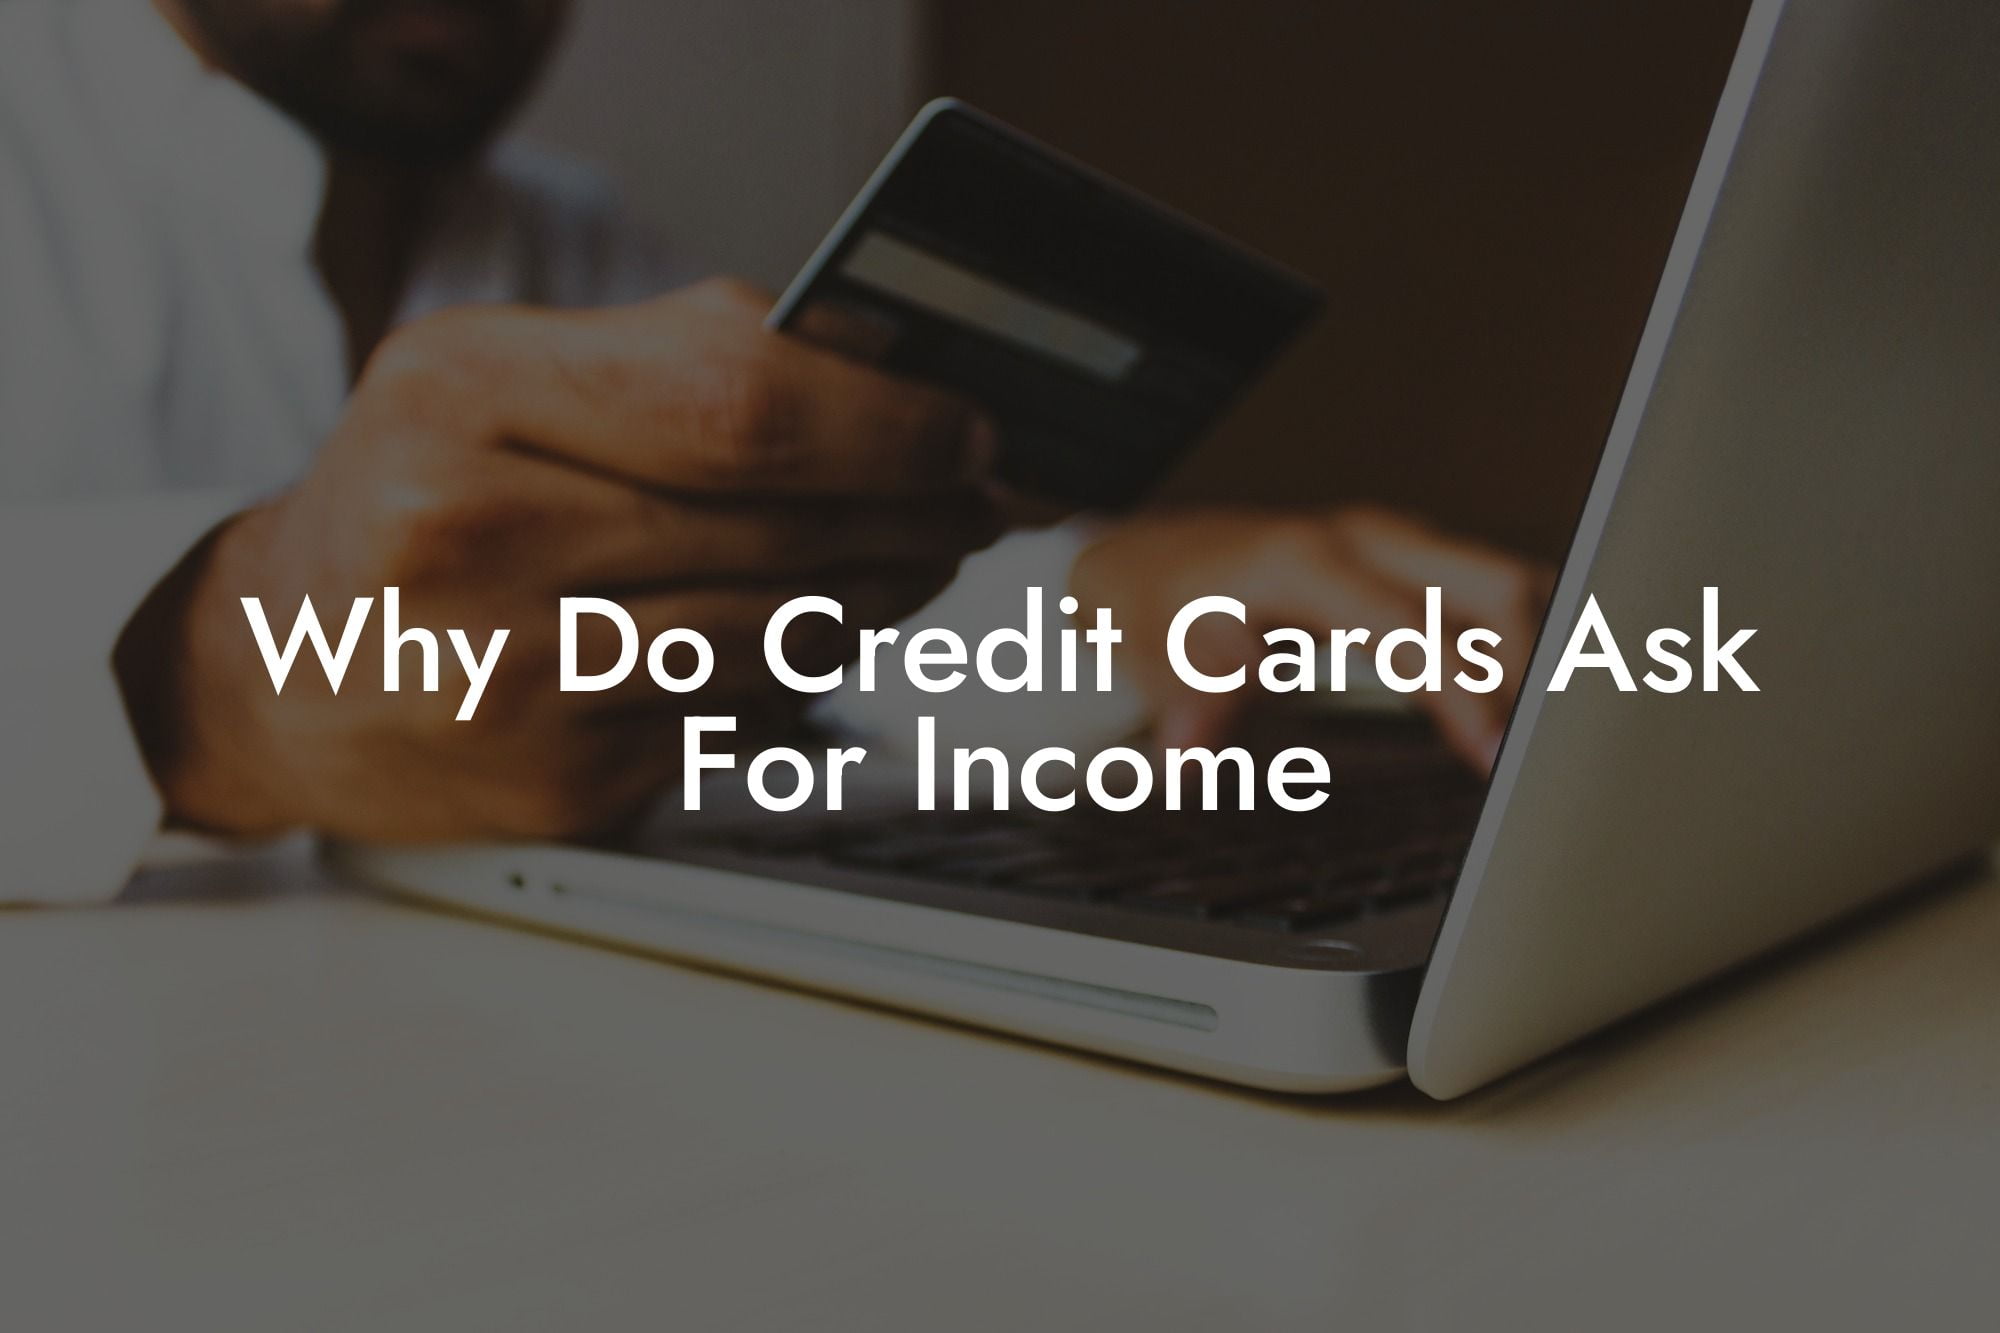 Why Do Credit Cards Ask For Income